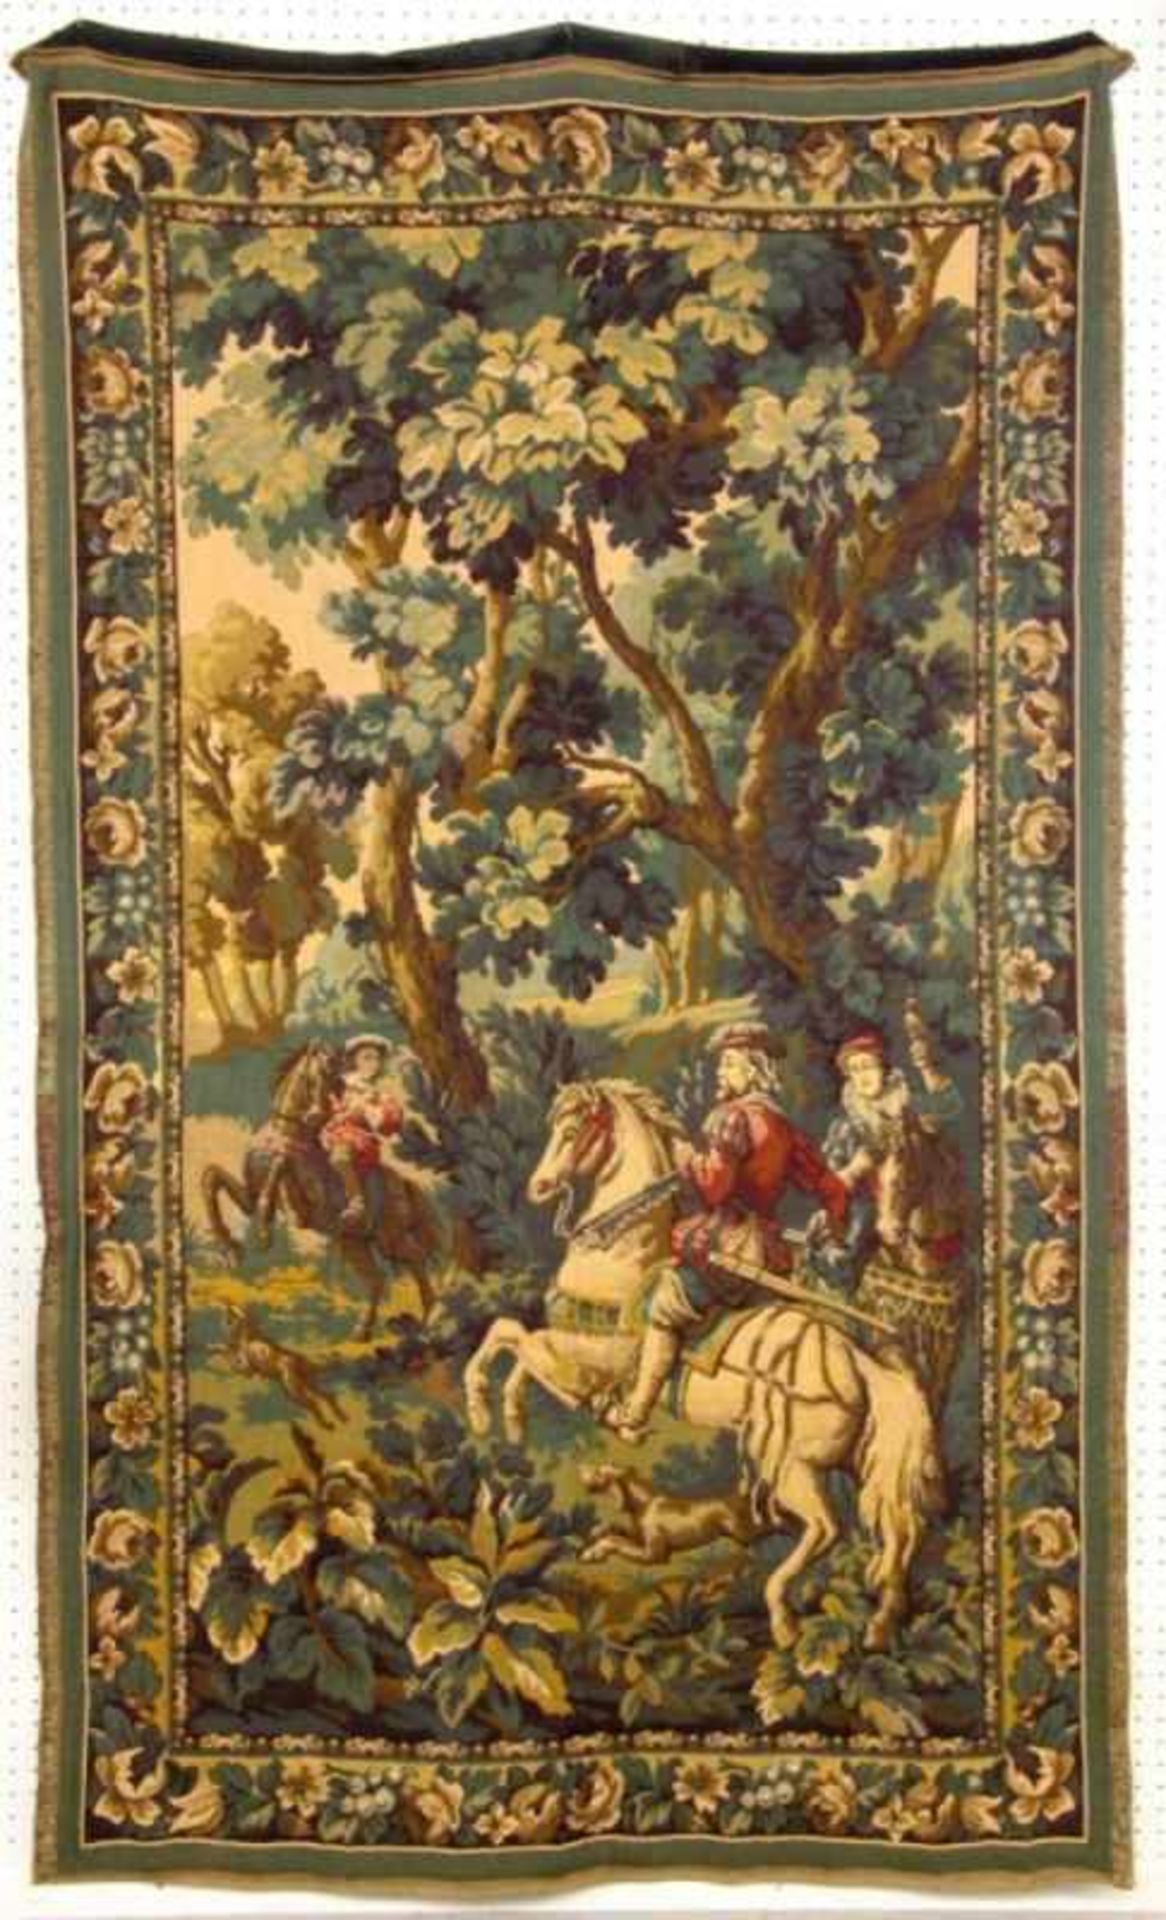 A TAPESTRY France Hawking. Colourful Renaissance style woven tapestry. 200 x 125